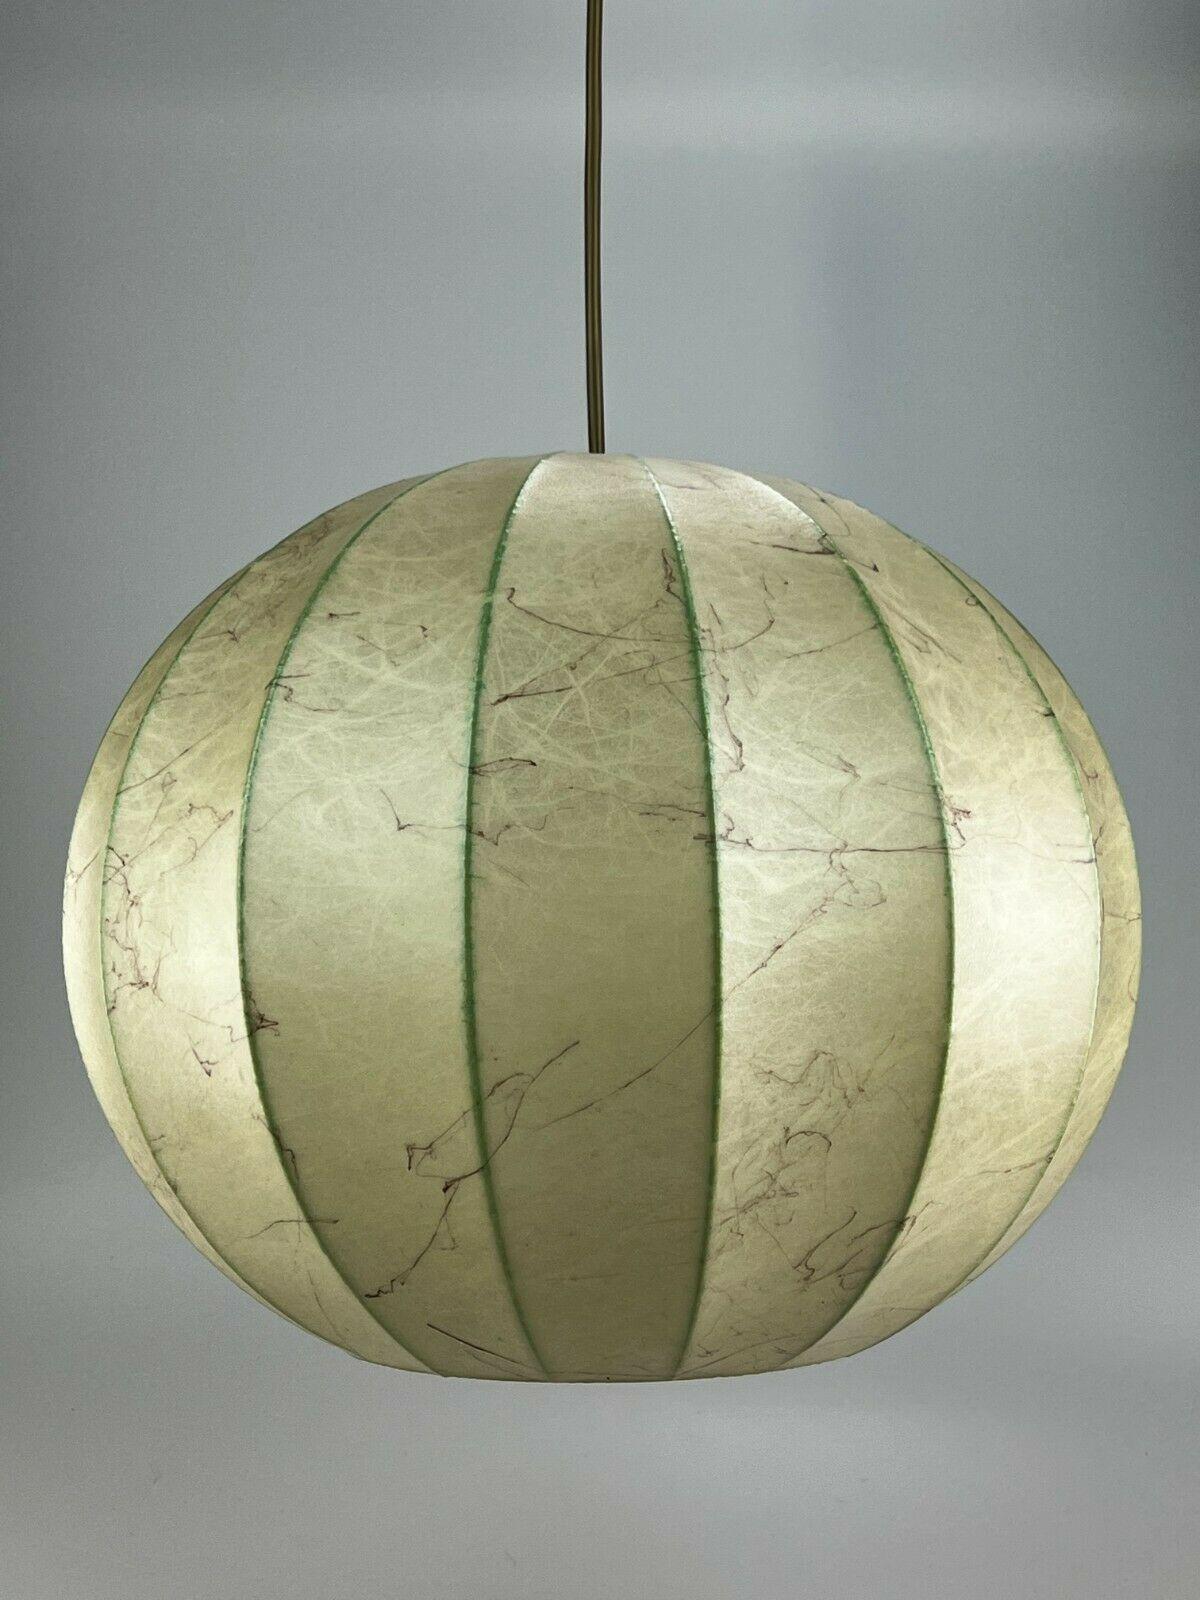 1960s 1970s Goldkant Lights Ball Lamp Cocoon Moonlamp Space Age Design

Object: ceiling lamp

Manufacturer: Goldkant lights

Condition: good

Age: around 1960-1970

Dimensions:

Diameter = 40cm

Other notes:

The pictures serve as